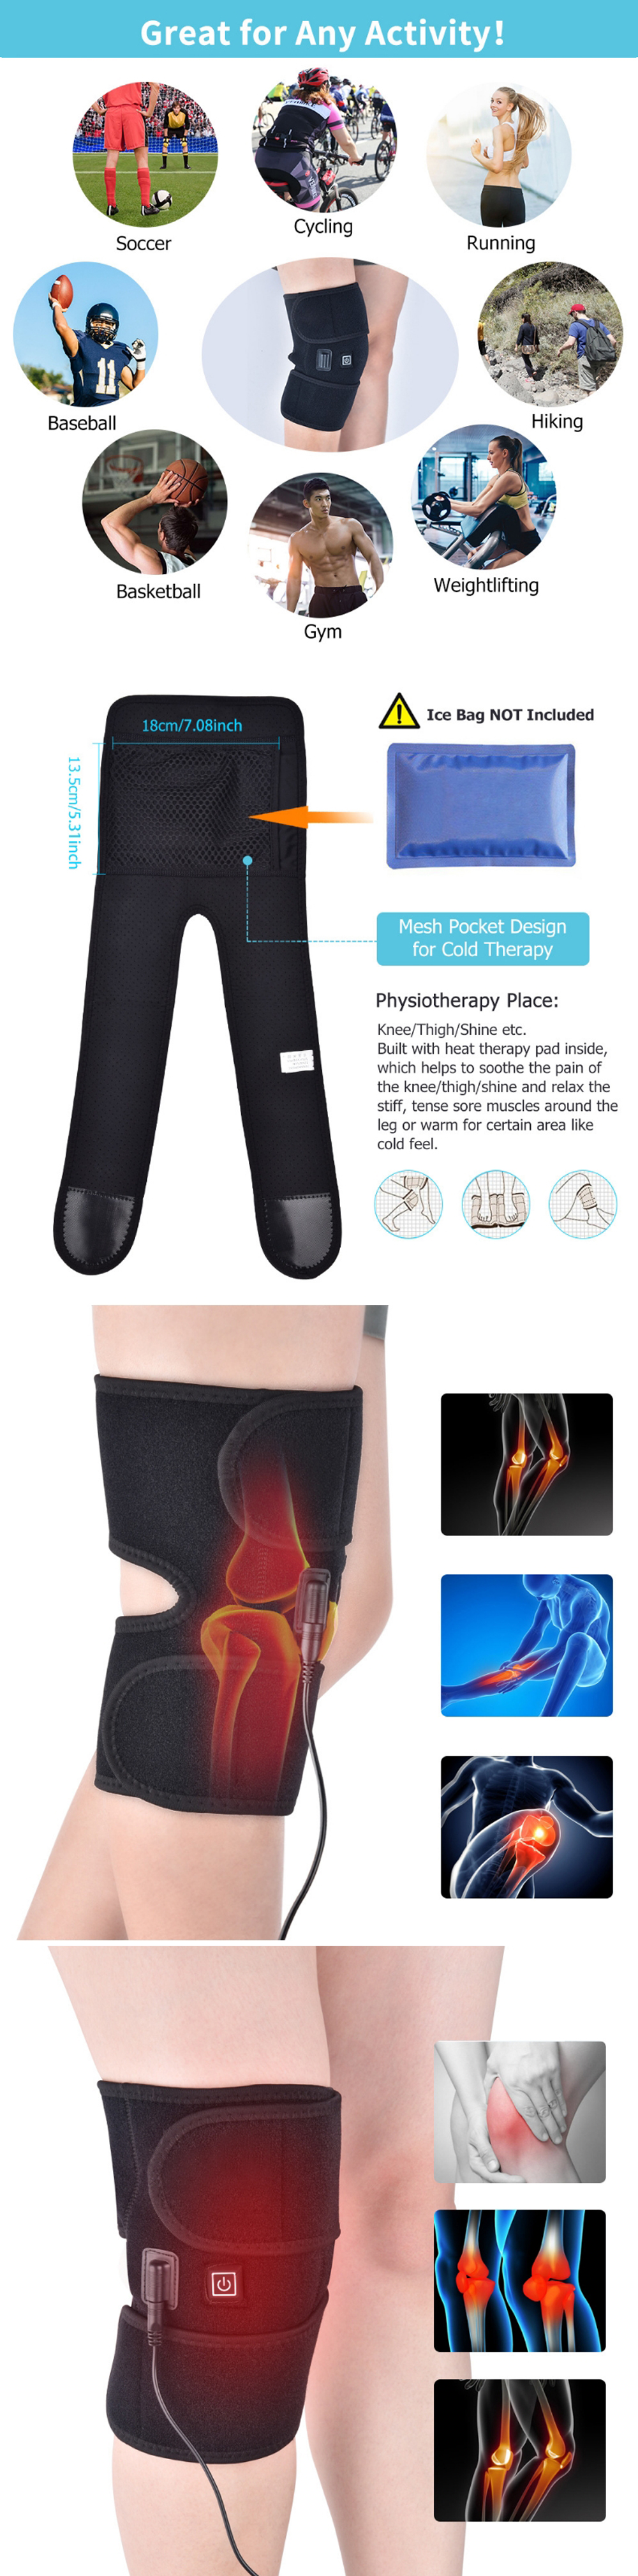 10W-Electric-Far-Infrared-Heating-Knee-Massager-Thermal-Vibration-Physiotherapy-Instrument-Knee-Pad--1923901-2